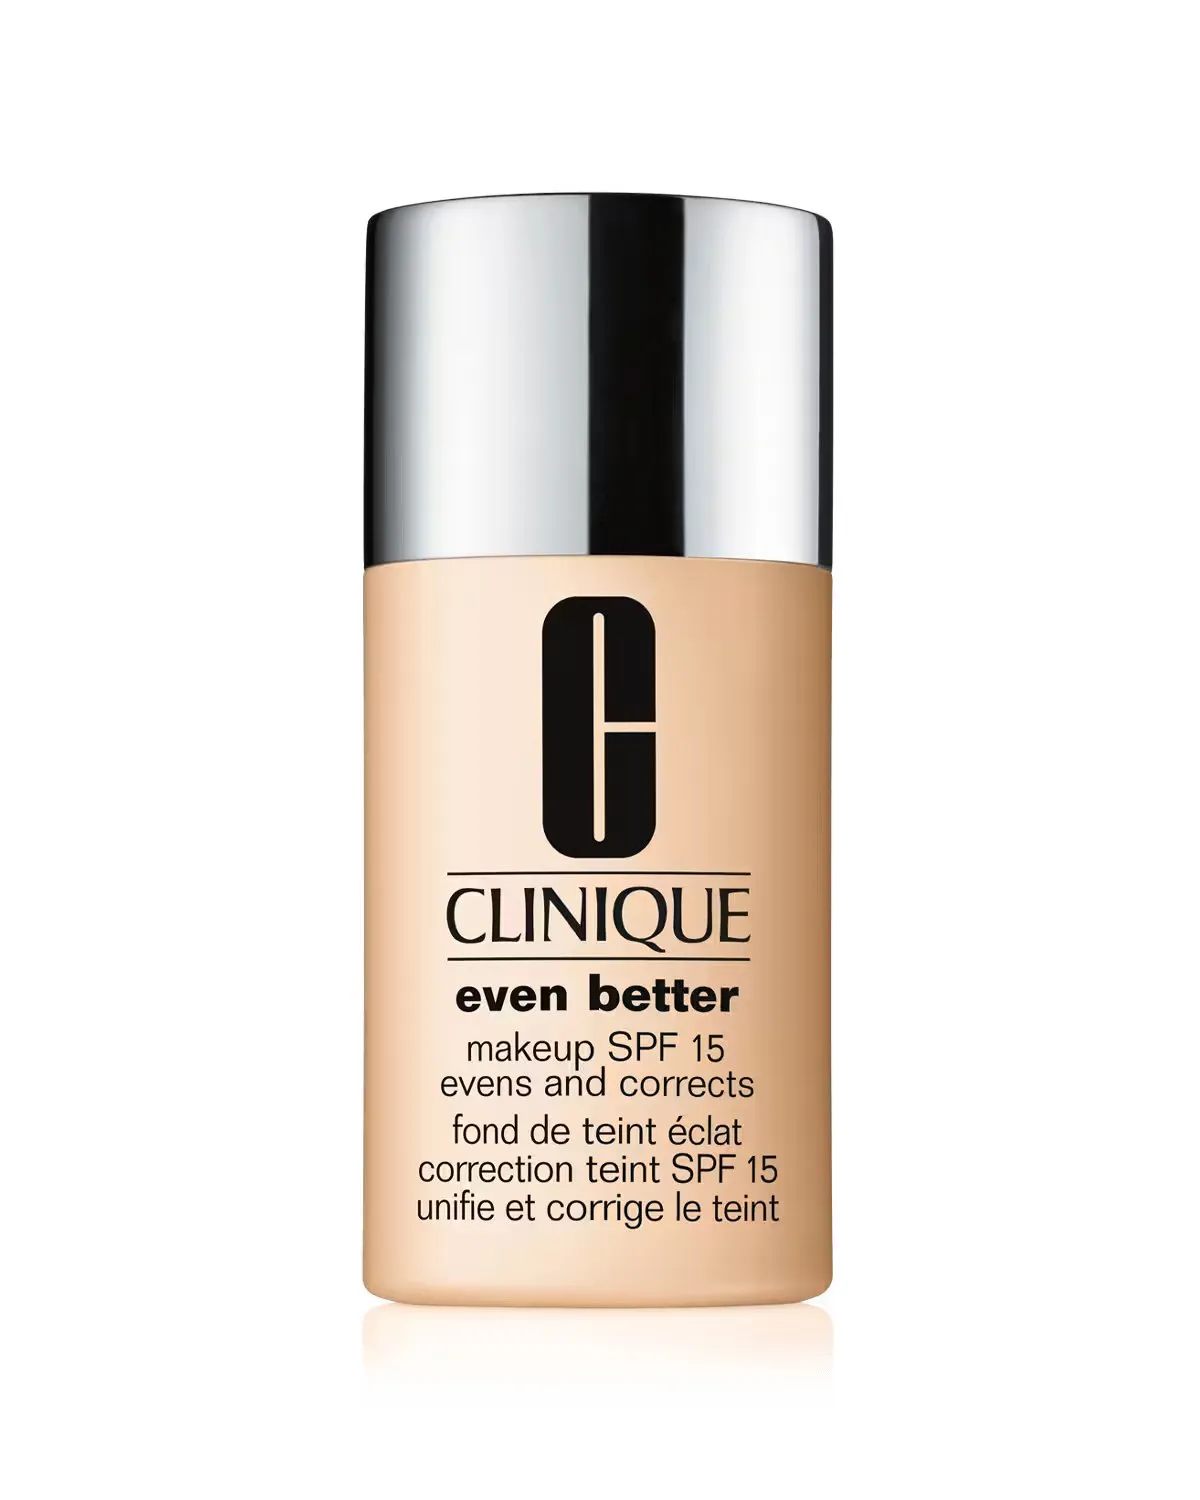 Even Better Makeup SPF 15 by Clinique, Clinique's bestselling foundation.